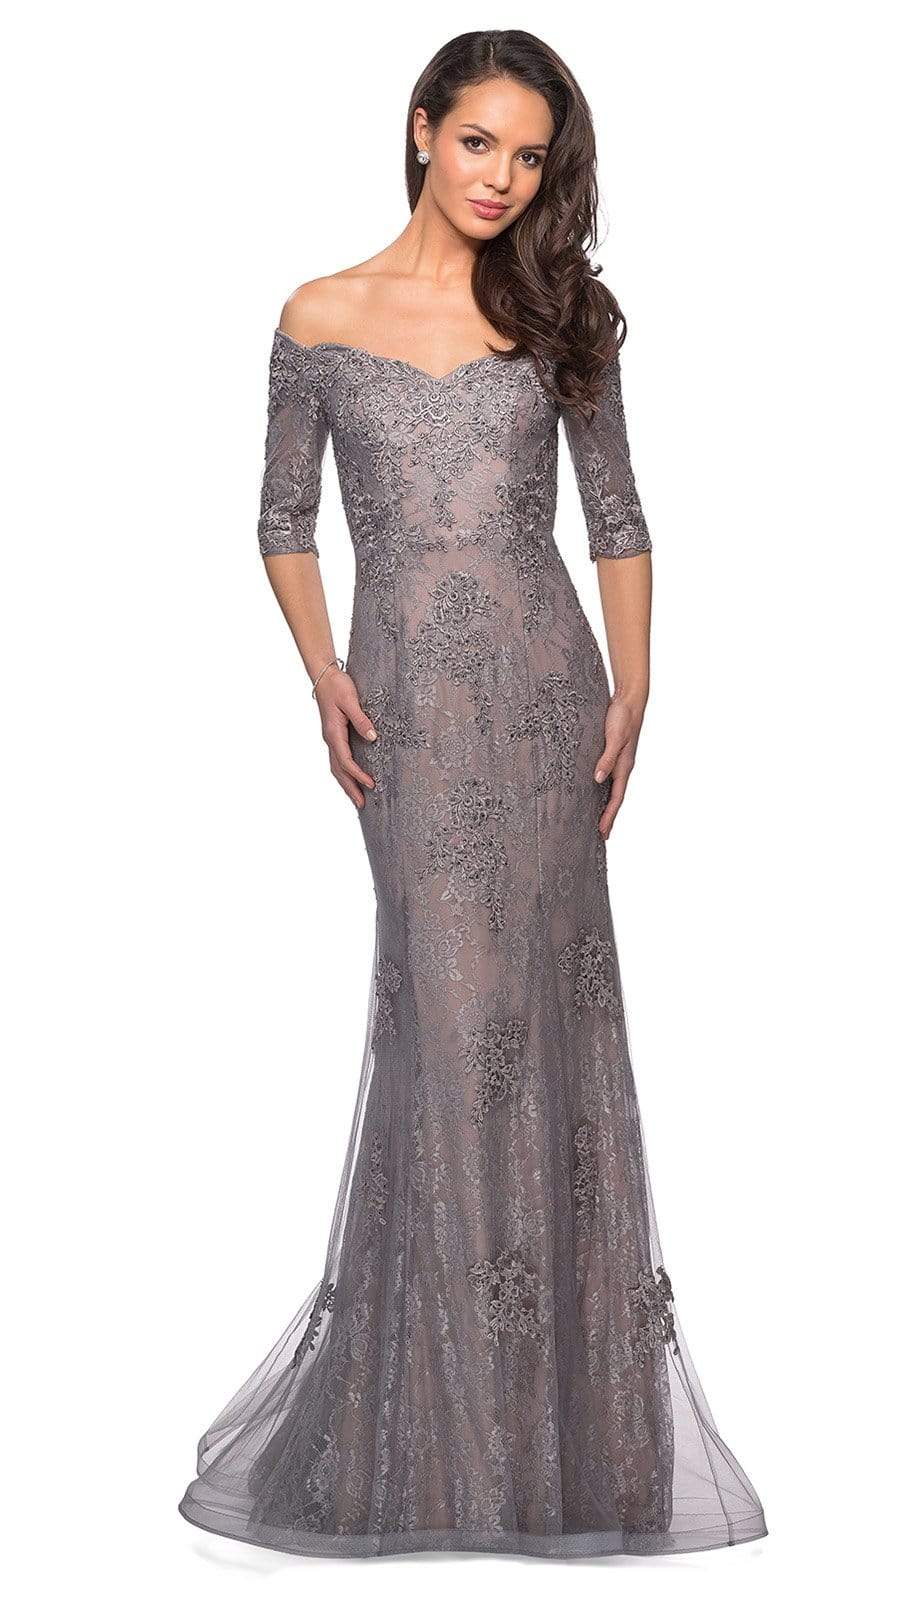 La Femme - 24866 Lace Embroidered Evening Gown Evening Dresses